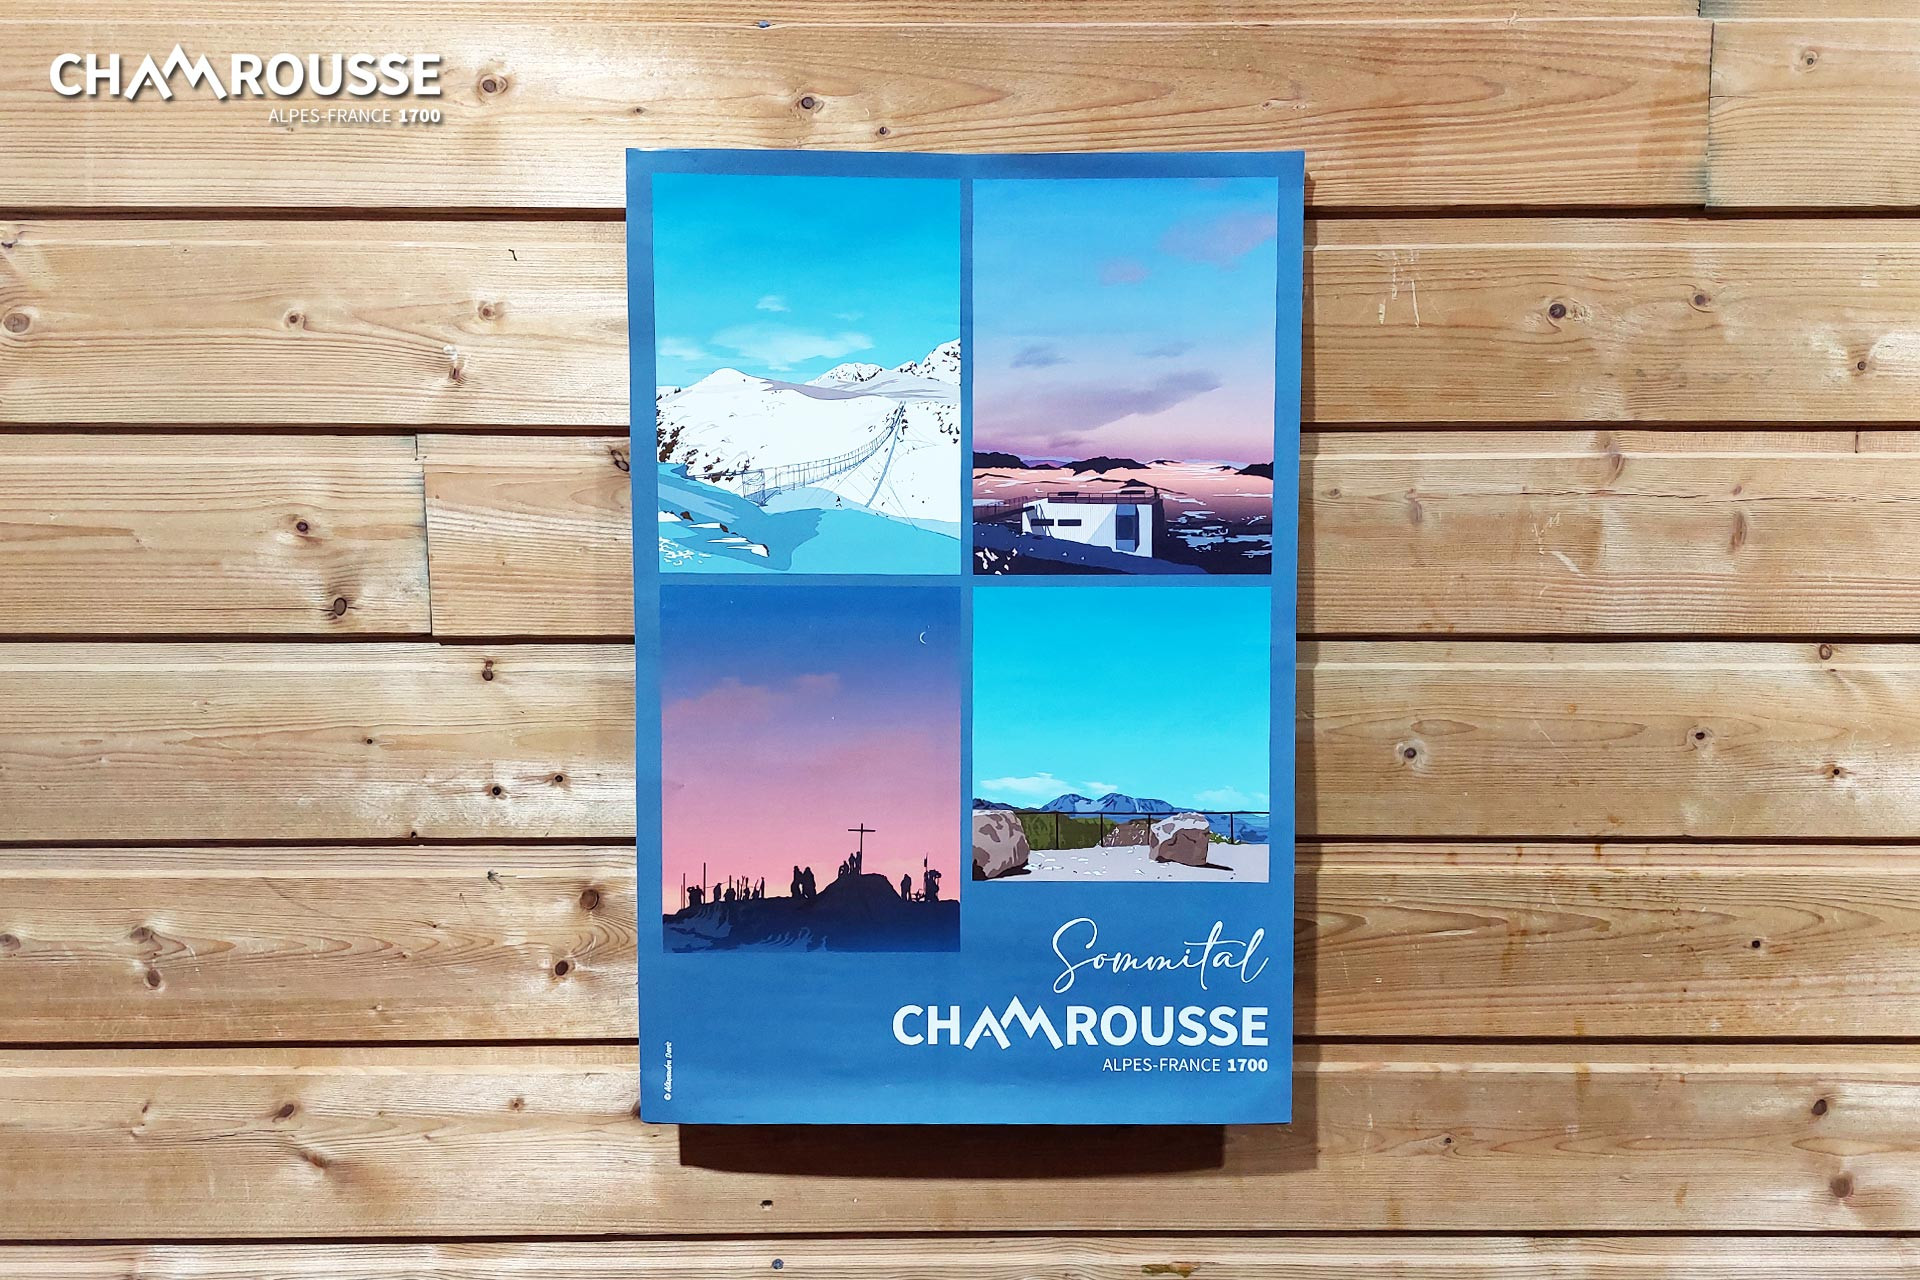 Chamrousse summit resort poster Panoramic Park summit himalayan footbridge rooftop cross belvedere boutique souvenir gift ski resort mountain grenoble isere french alps france